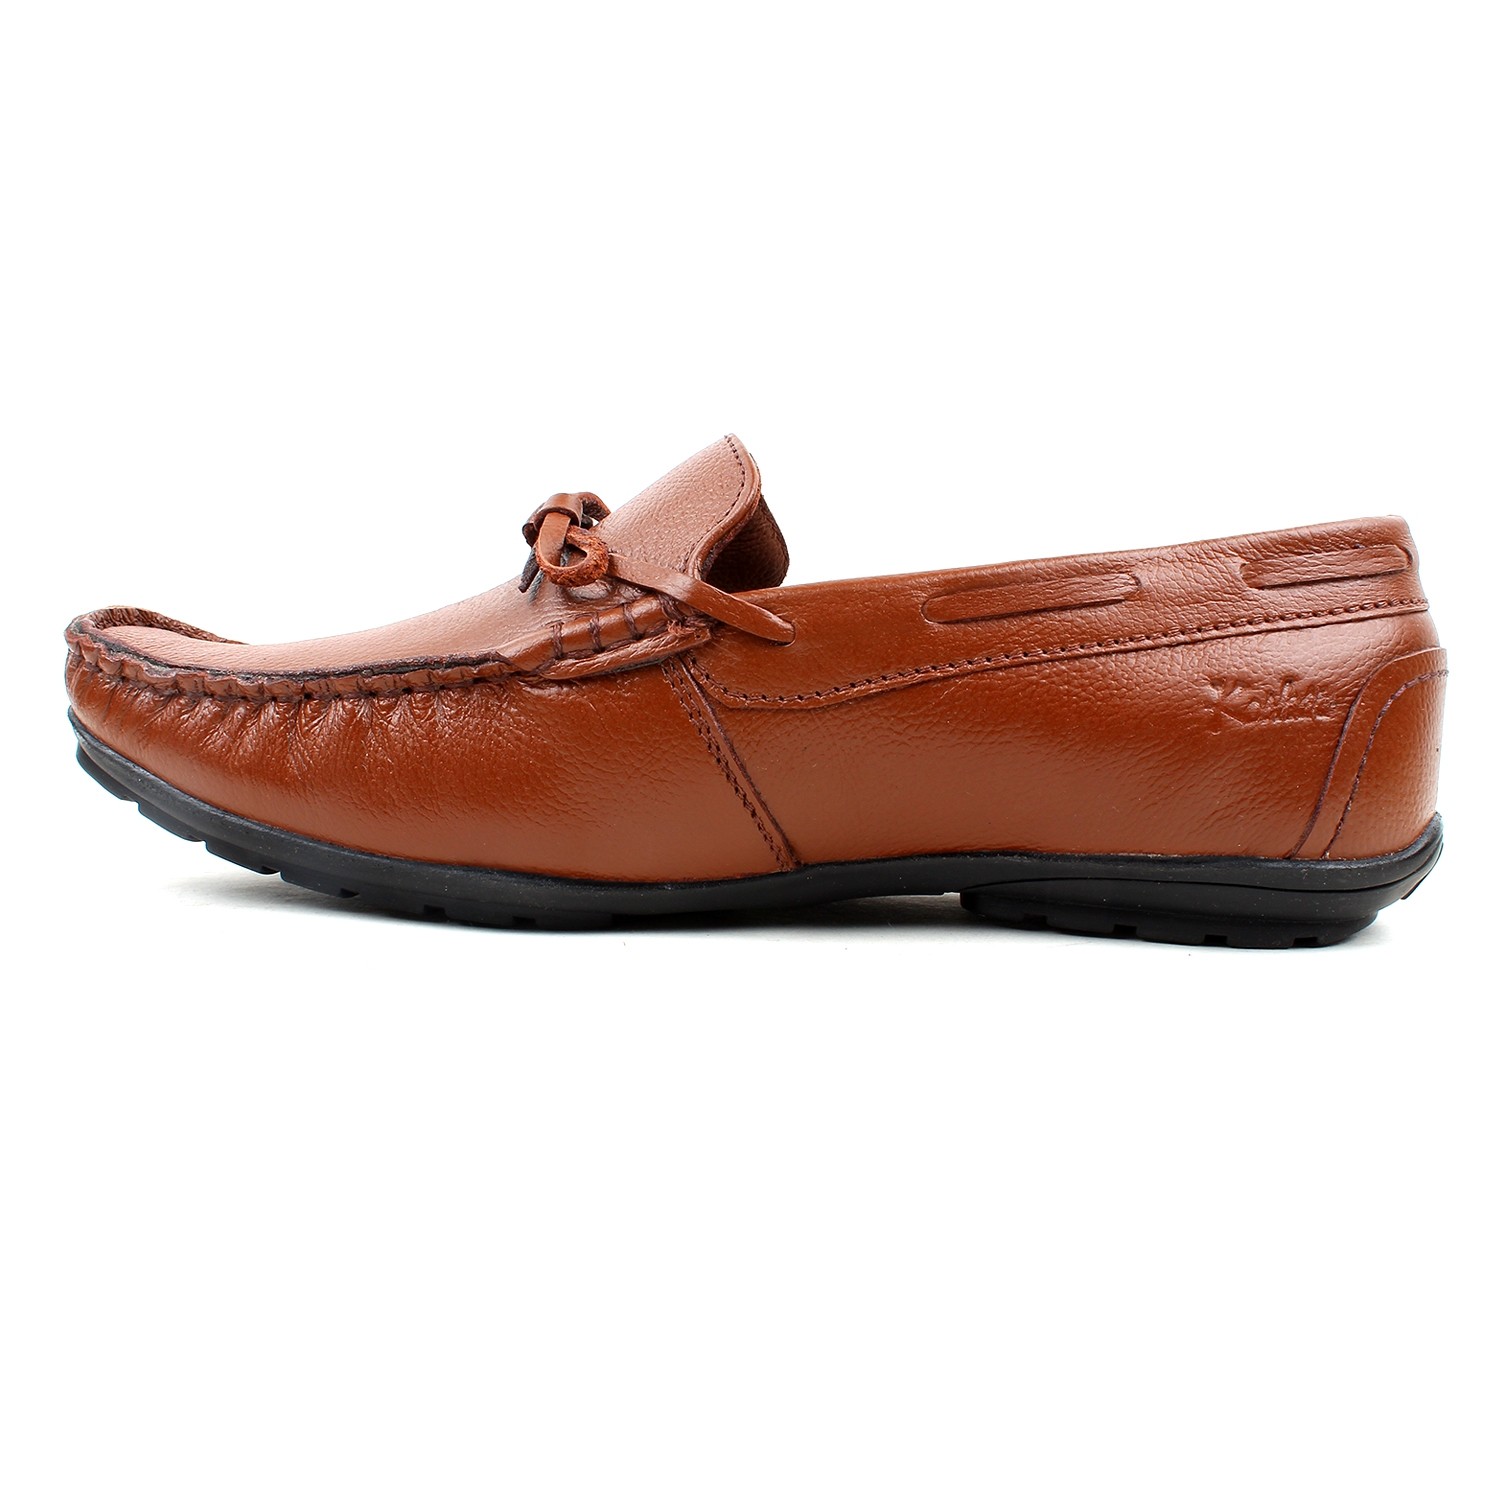 Leather Shoes Brown - MEN SHOES